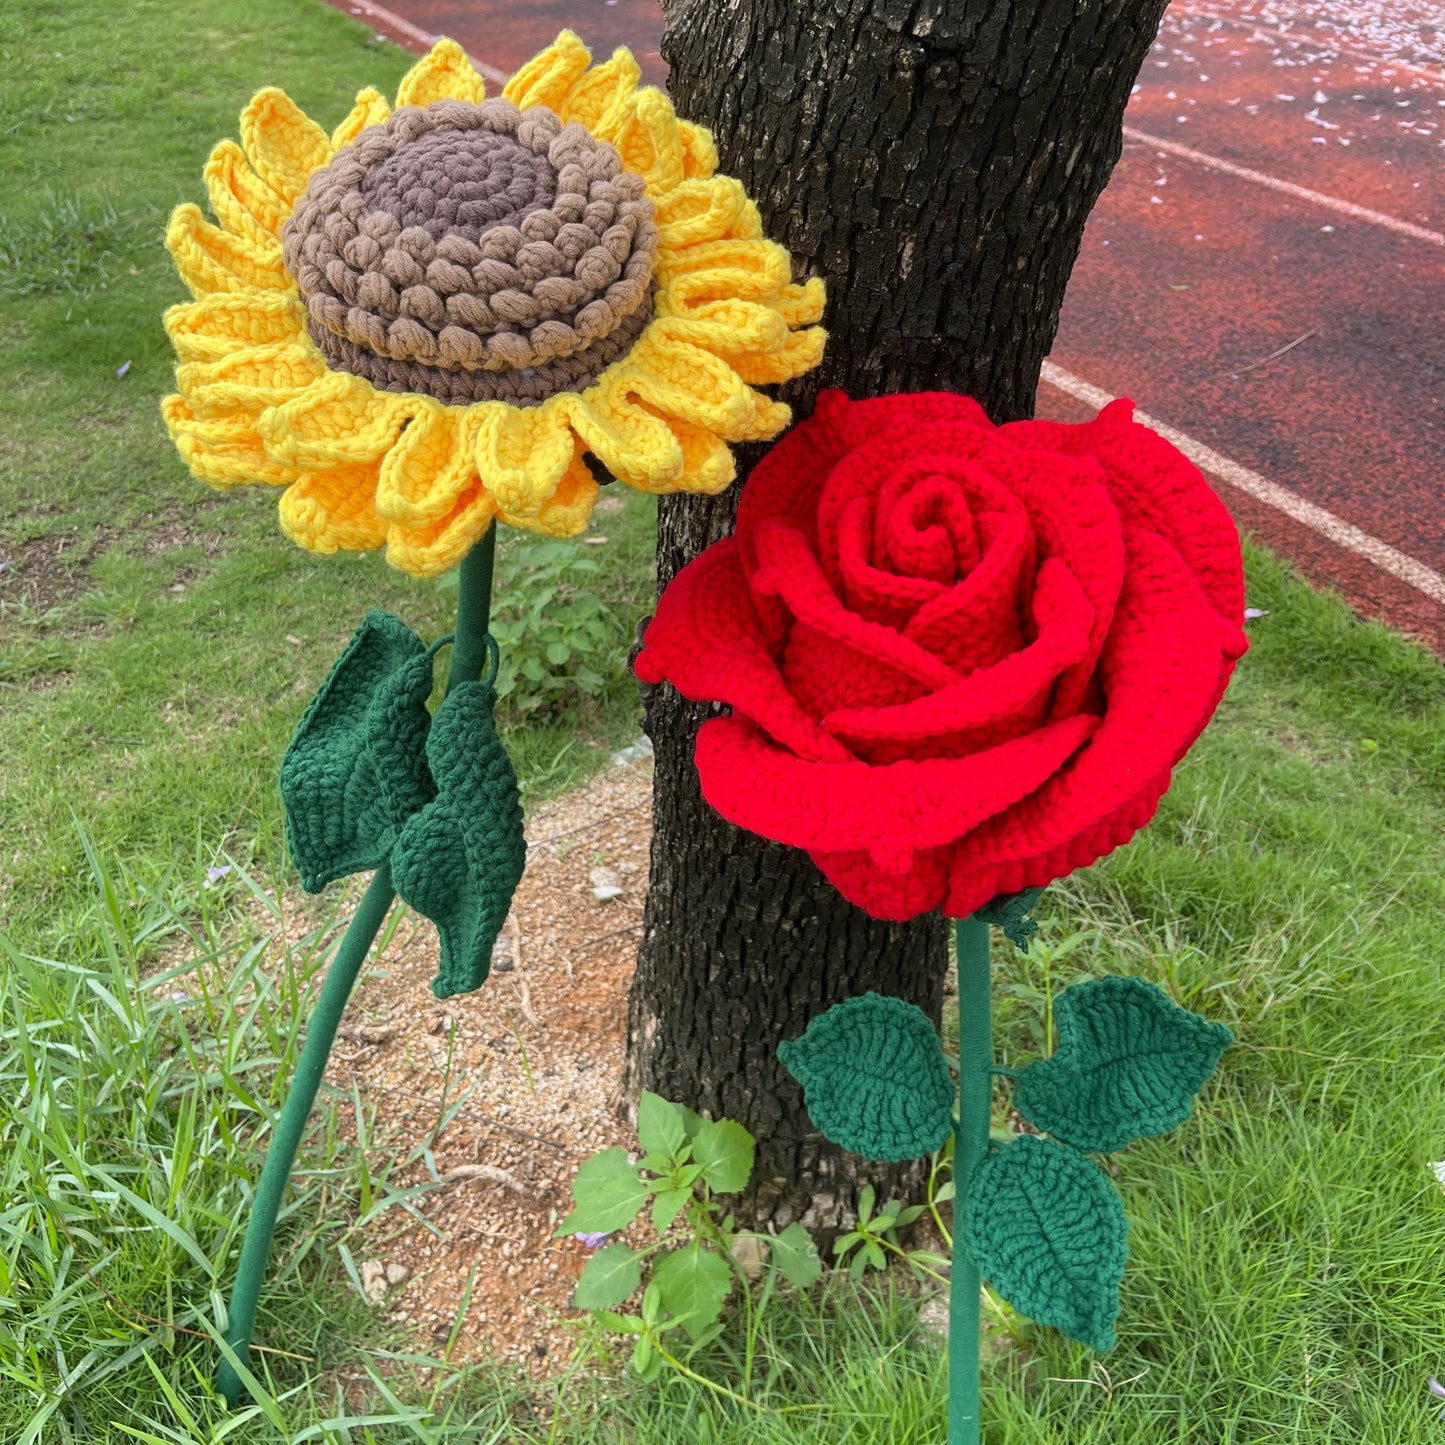 Handmade Crochet Giant Flower Stake Decor - Sunflower and Red Rose Props for Party Celebration Graduation